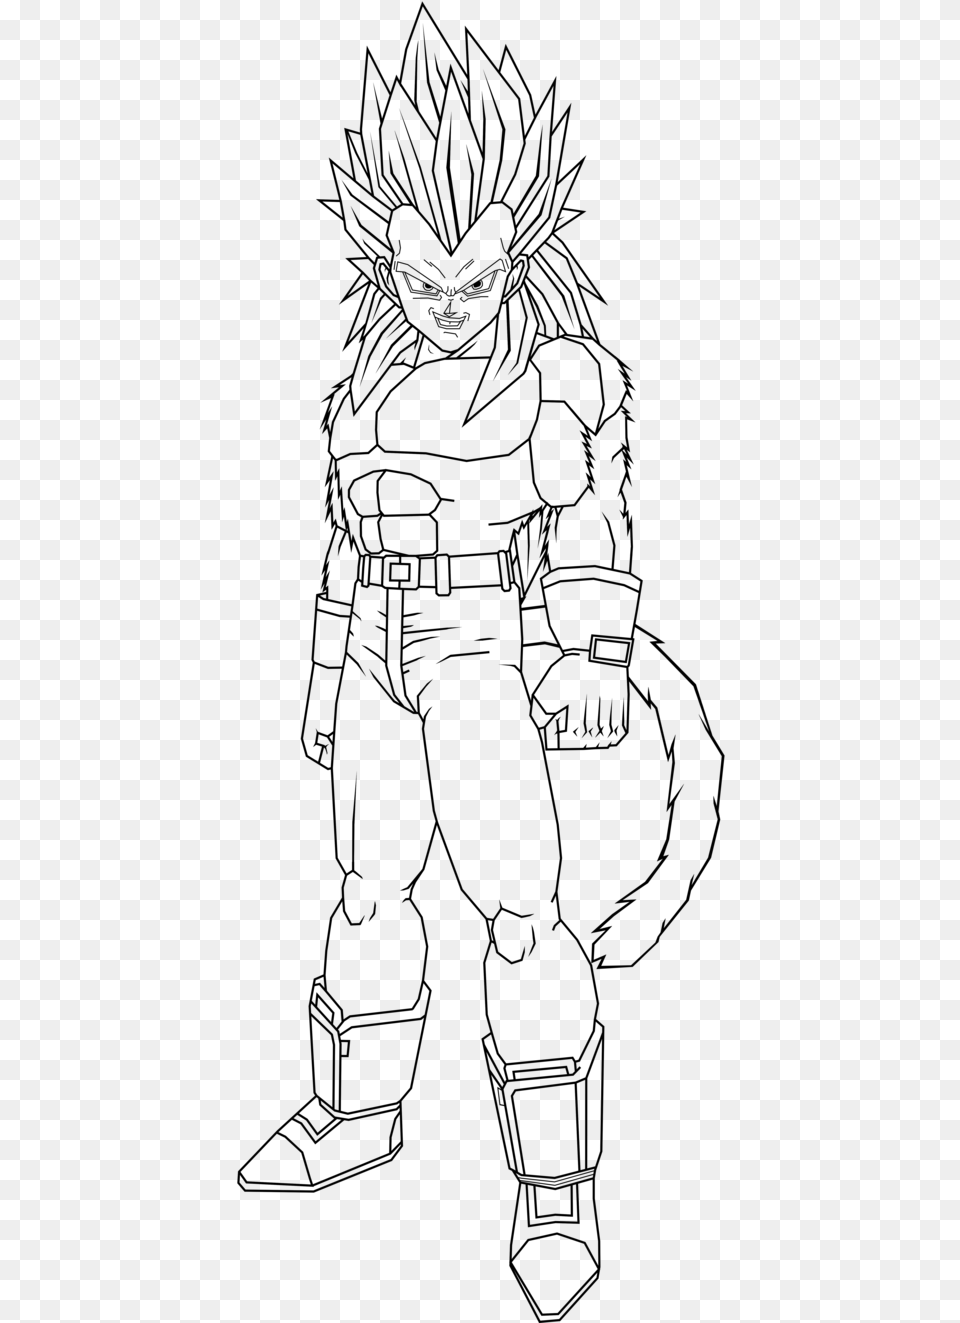 Challenge Vegeta Coloring Pages Learnfree Me, Gray Free Png Download